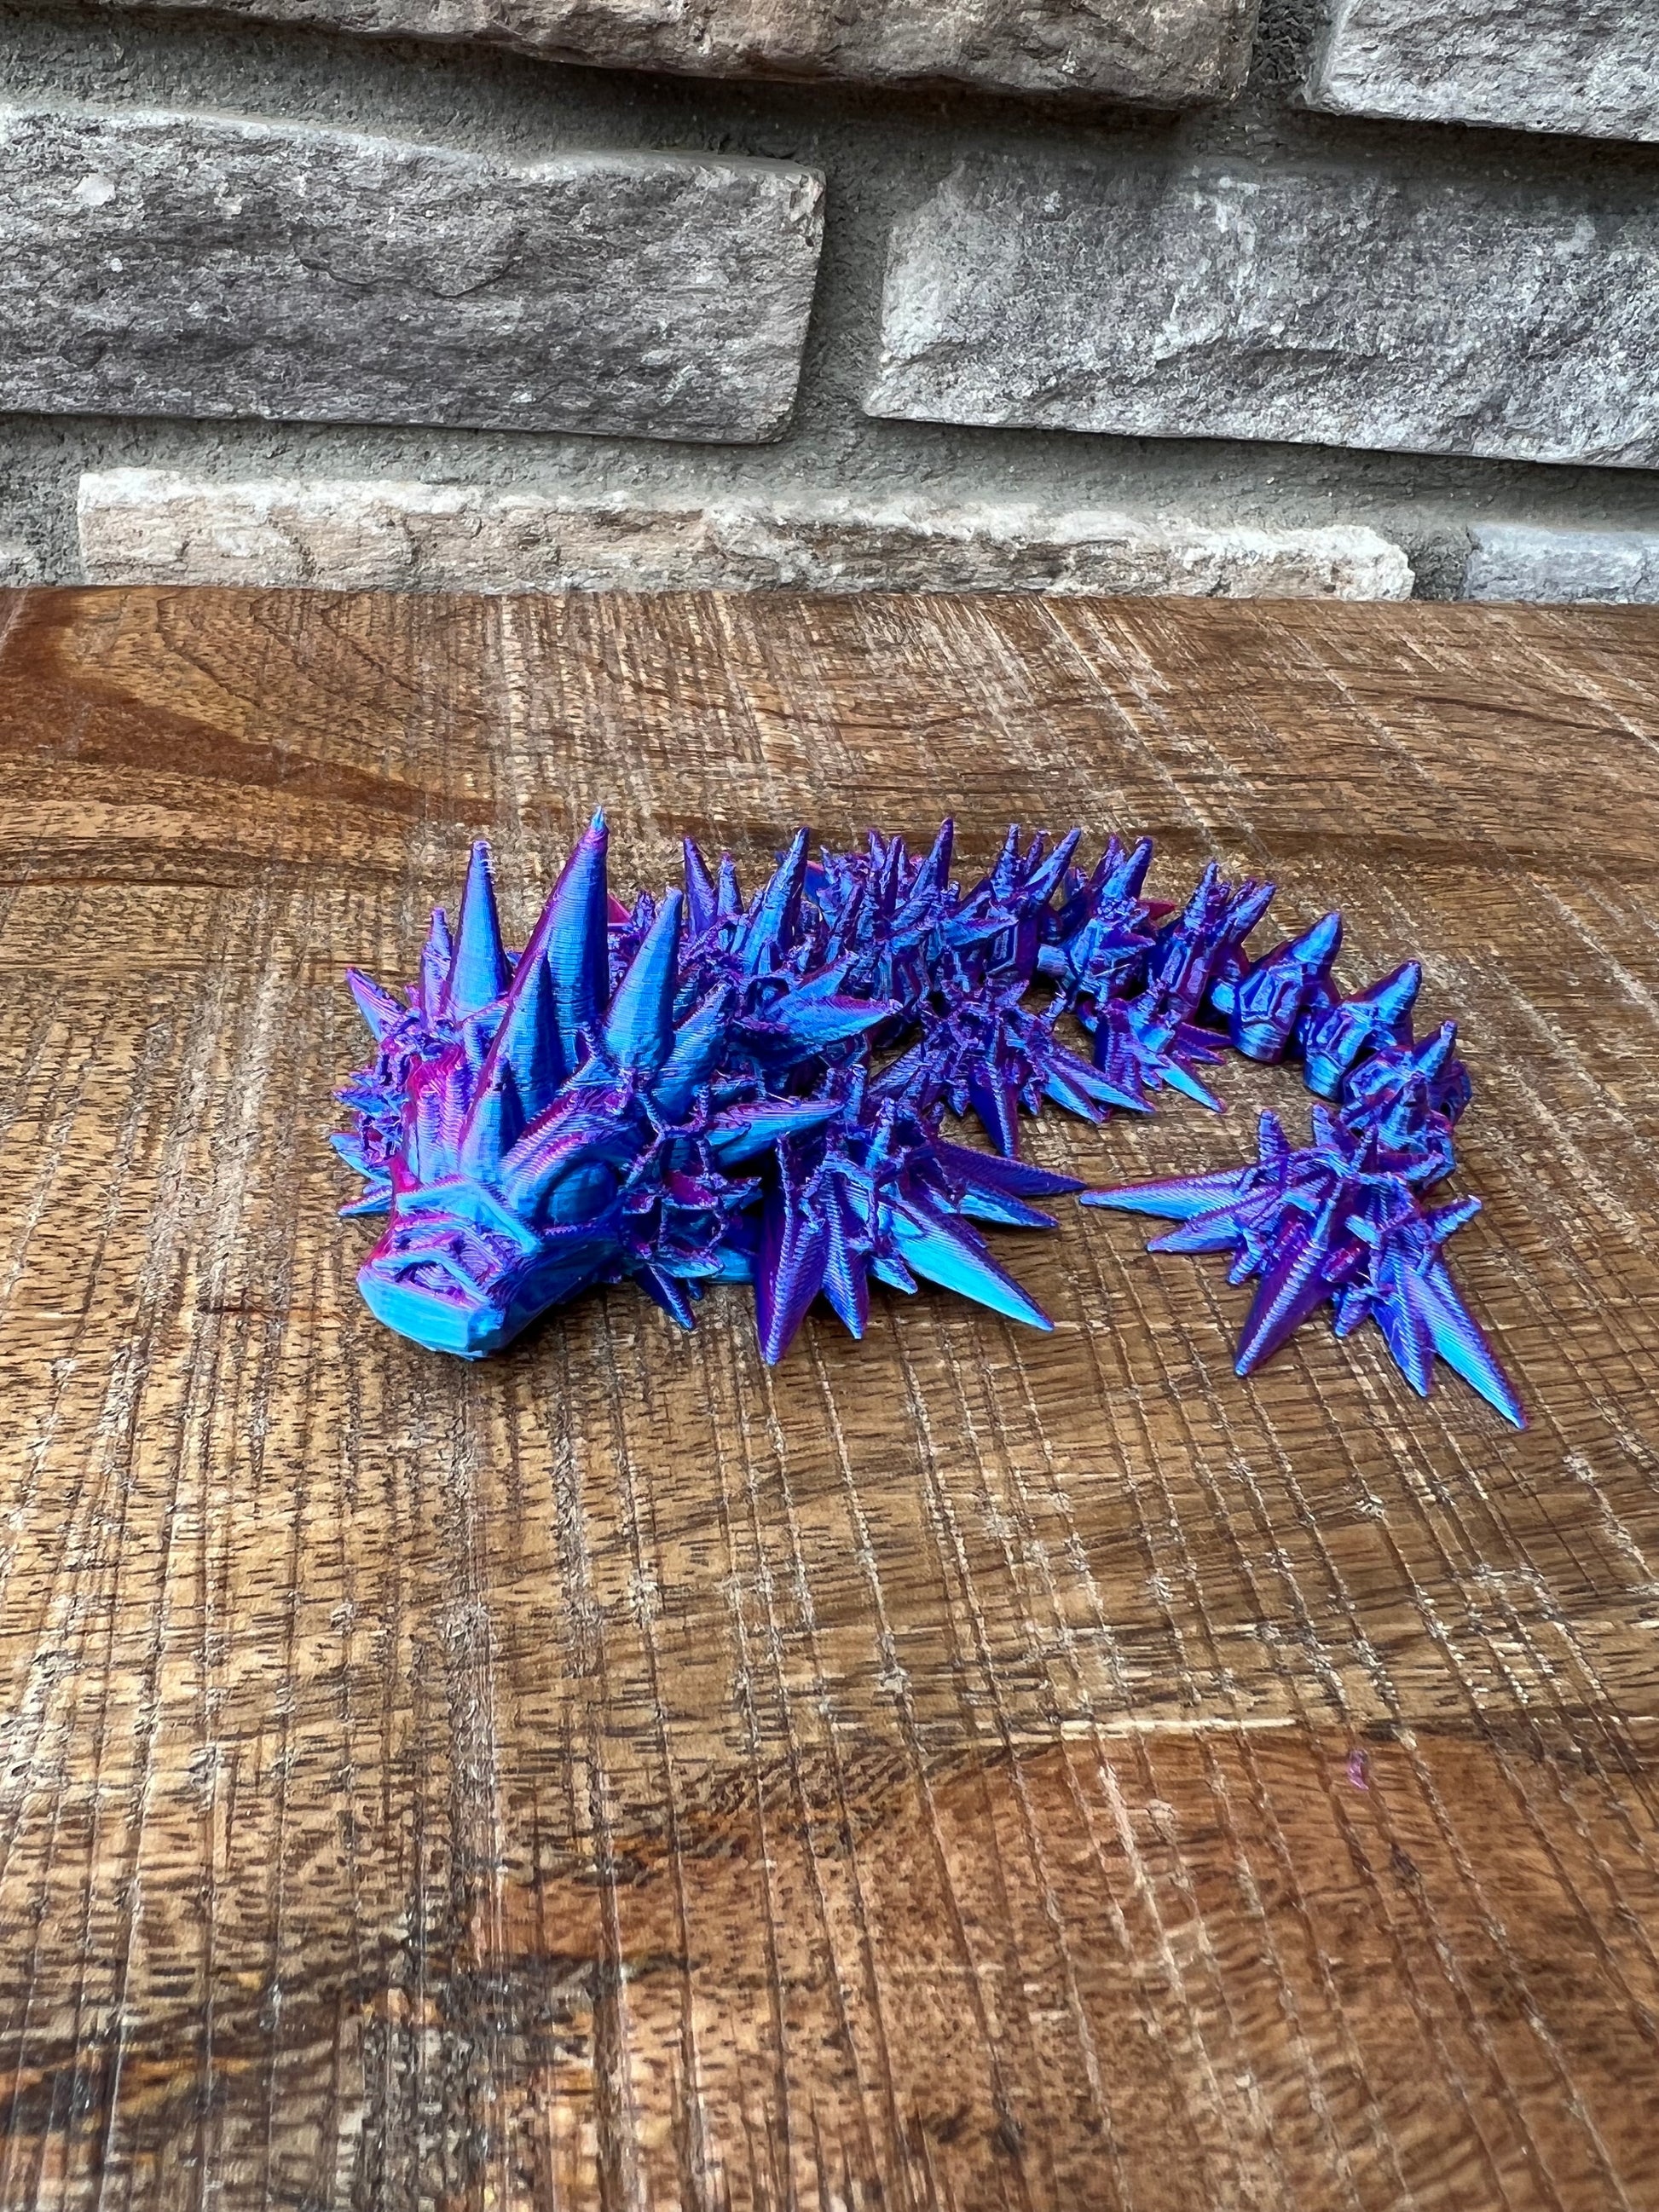 3D Printed Articulated Flexi Void Sea Dragon Fidget Toy (Small, Black)